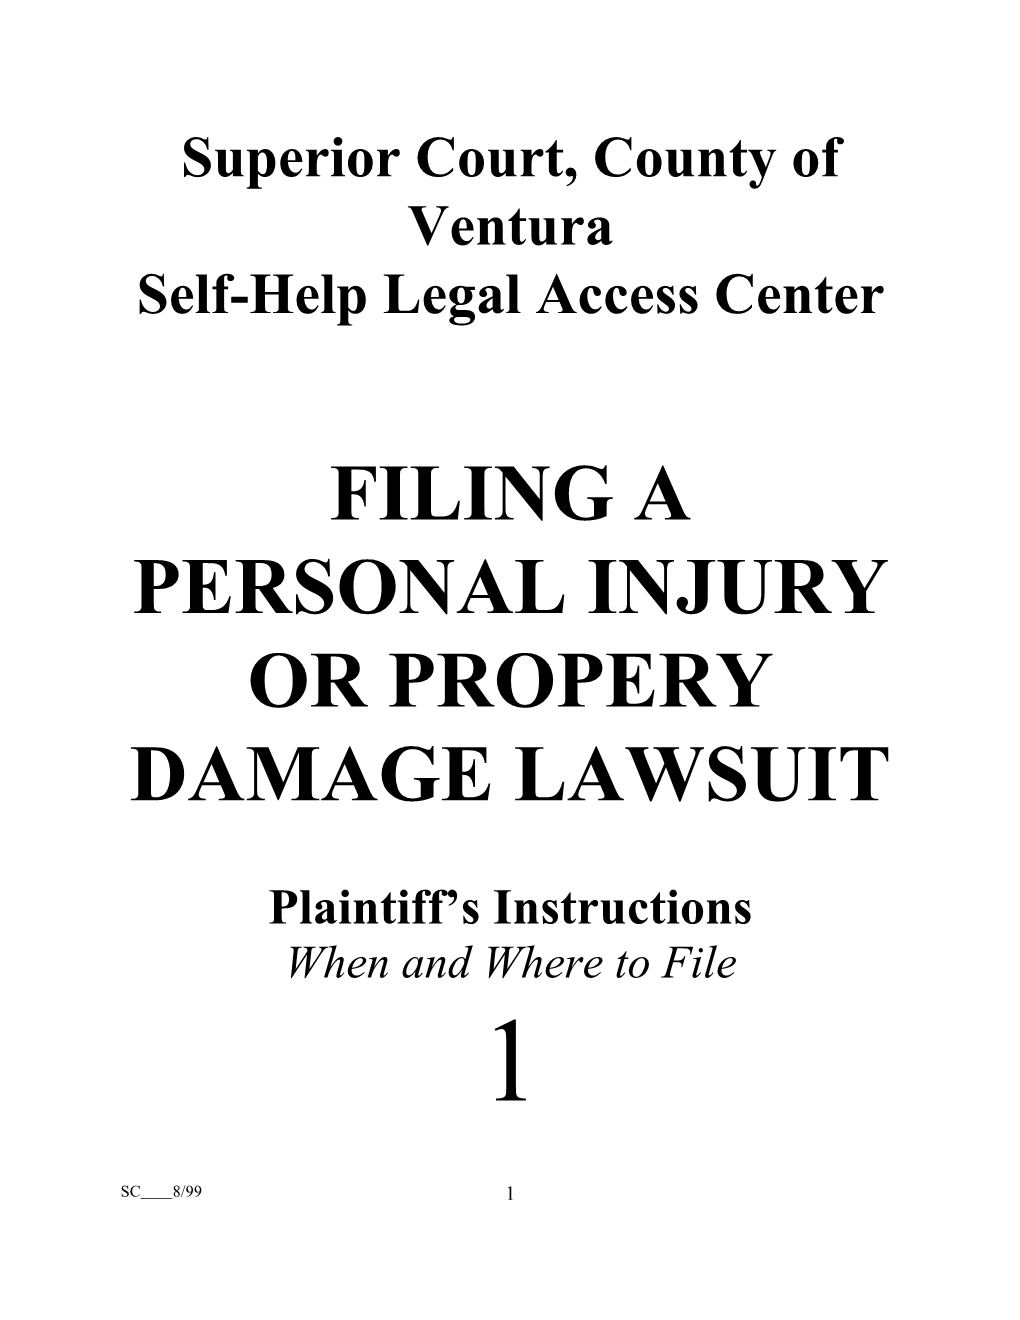 Filing a Personal Injury Or Property Damage Lawsuit, Plaintiff's